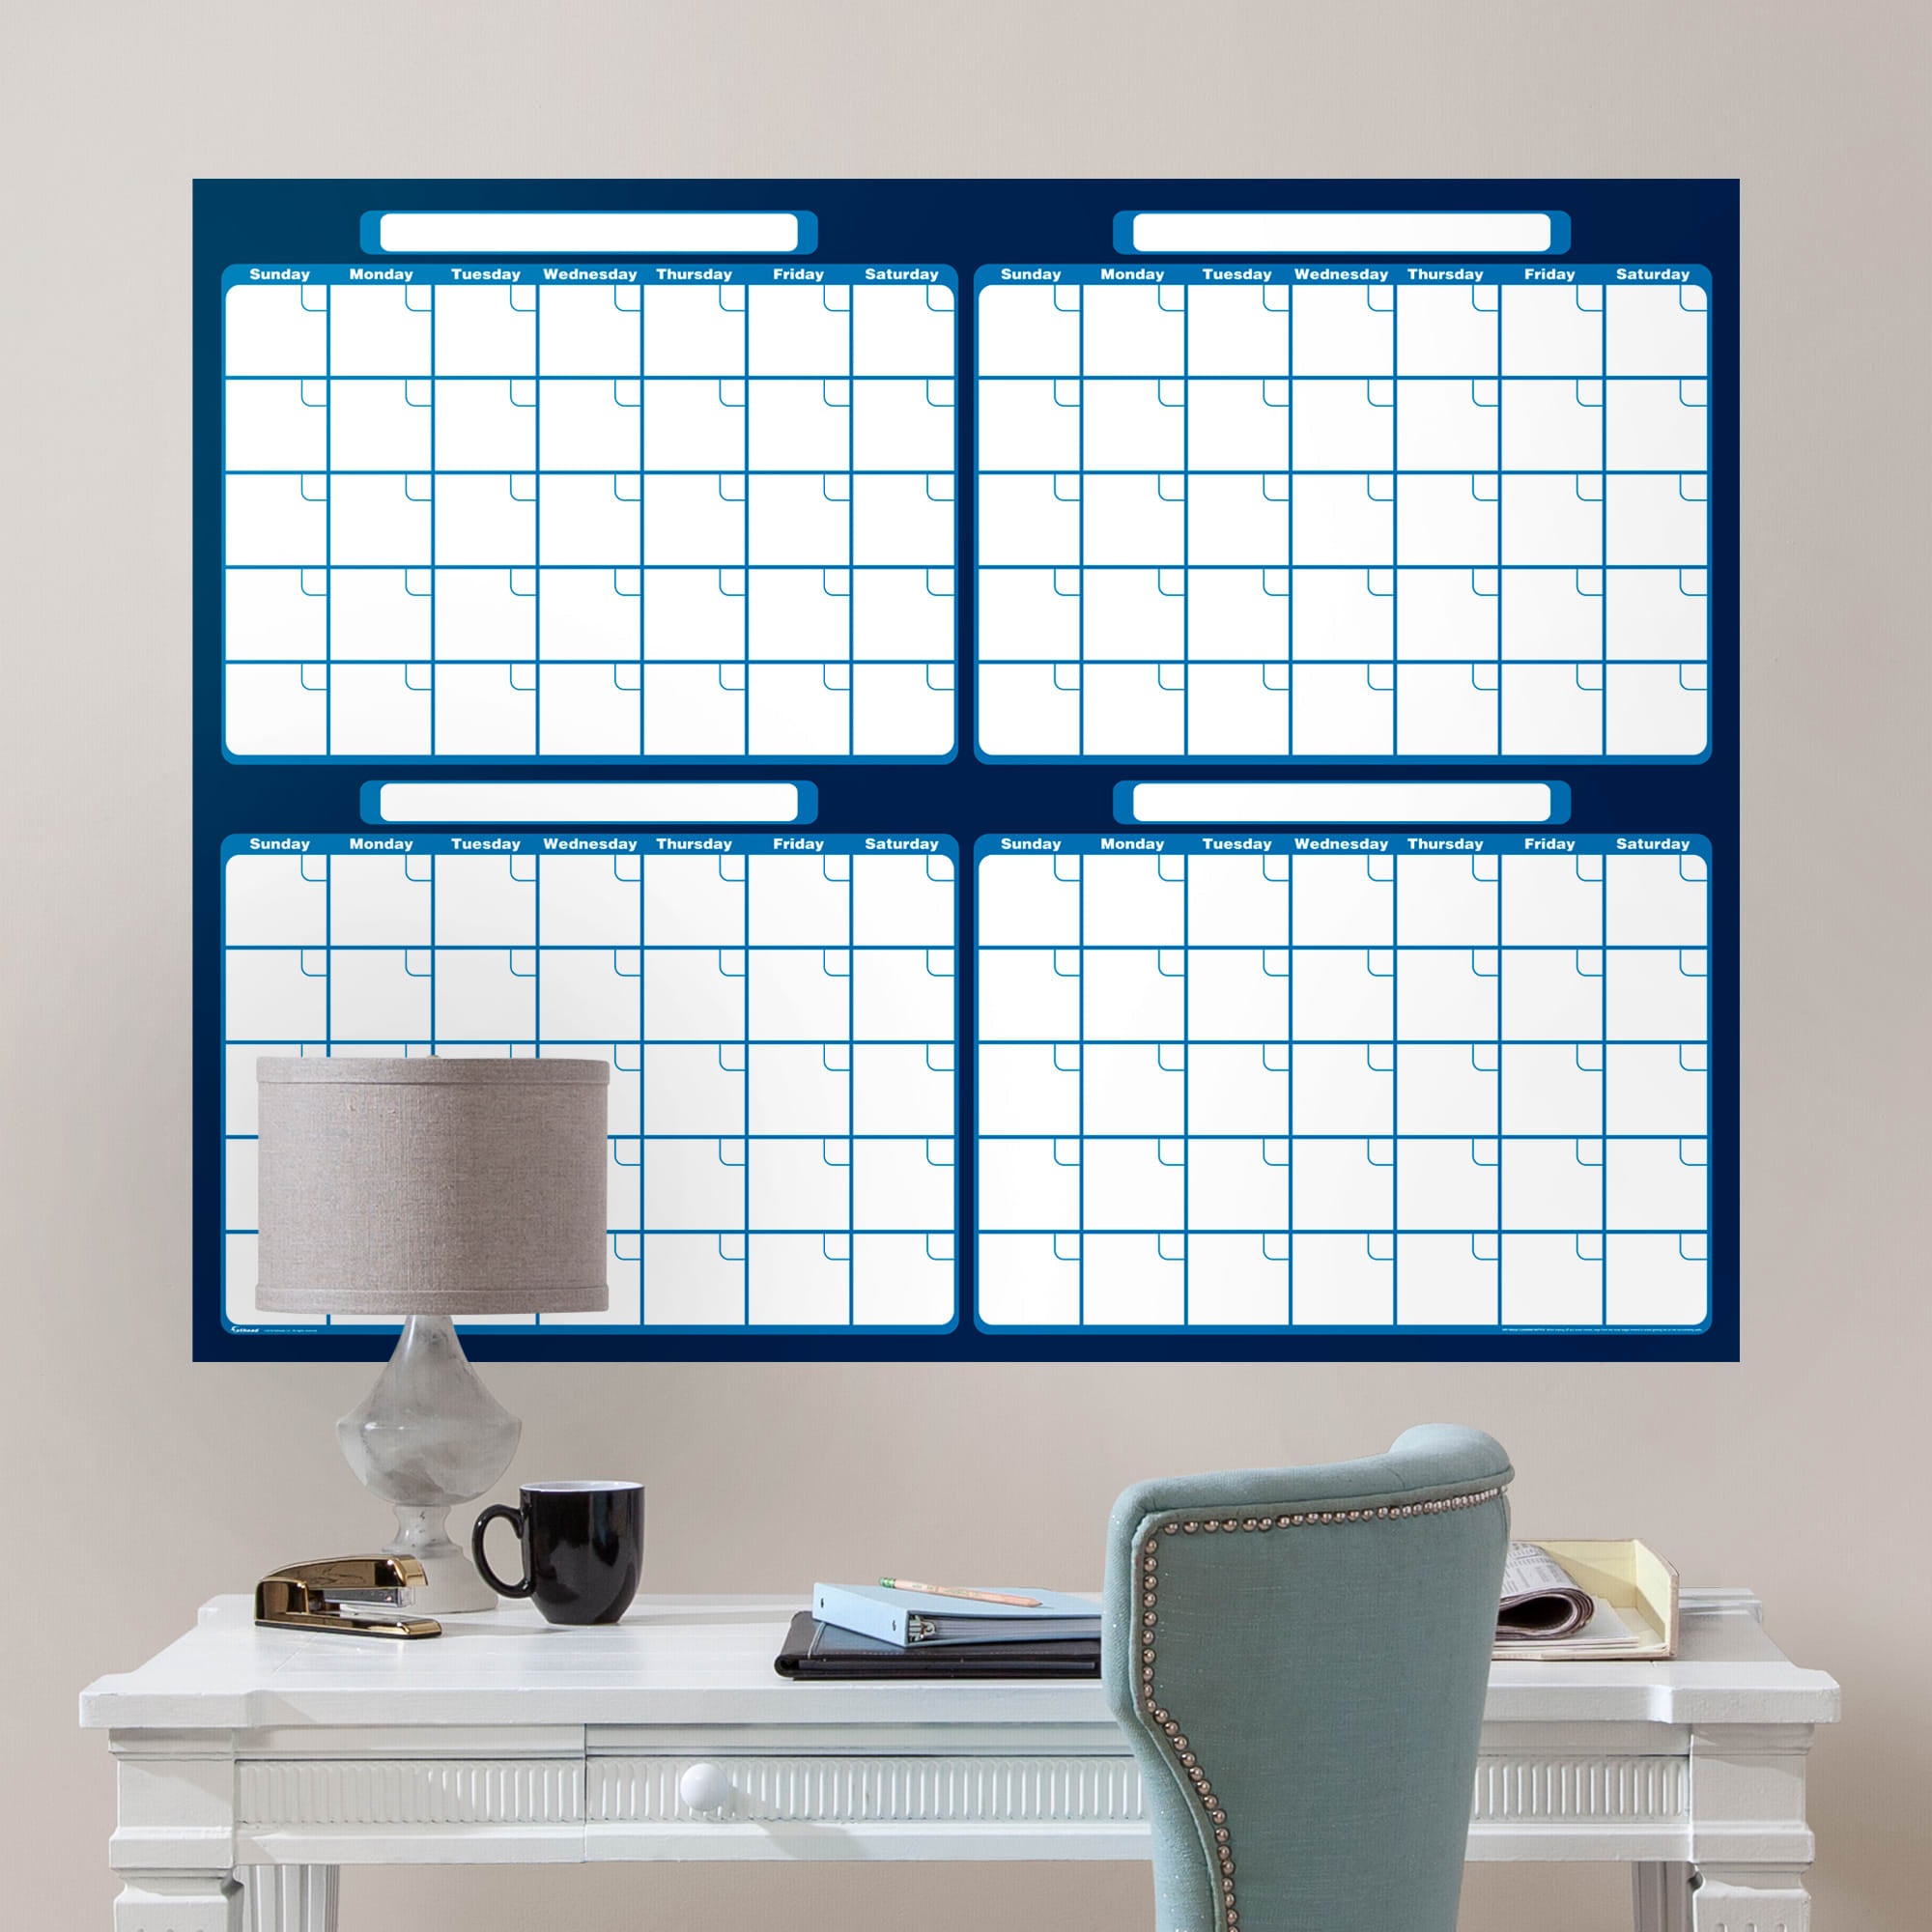 Four Month Calendar - Removable Dry Erase Vinyl Decal in Navy/Royal Blue (52"Wx39.5"H) by Fathead